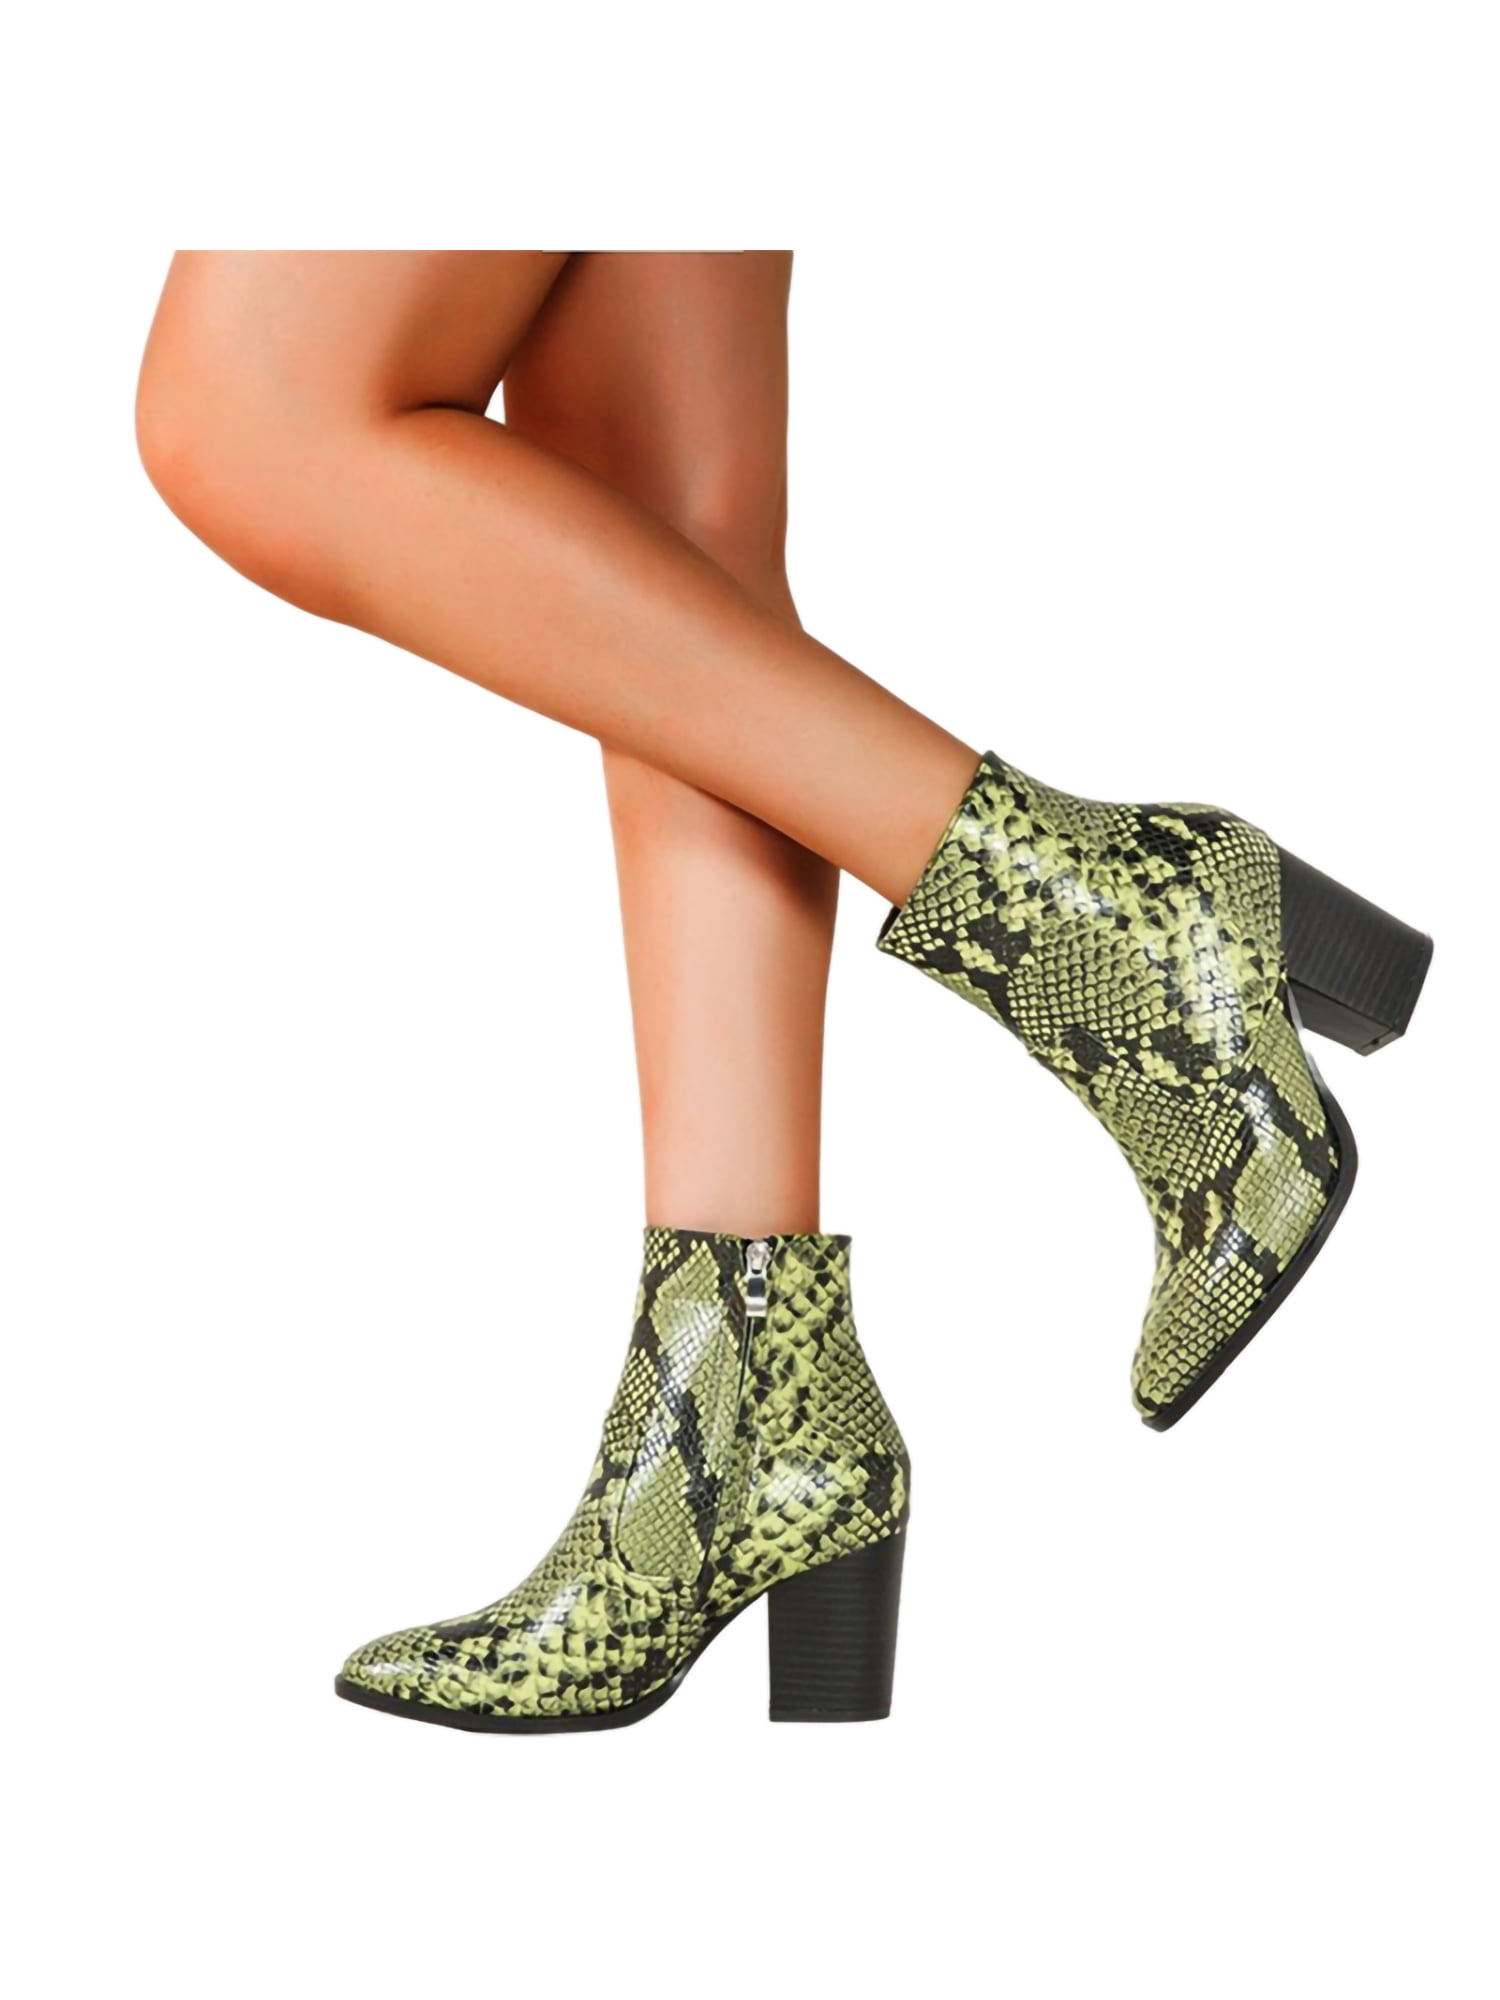 Women Chunky Heels Casual Comfy Boots Zipper Snakeskin Printed Ladies Shoes US 